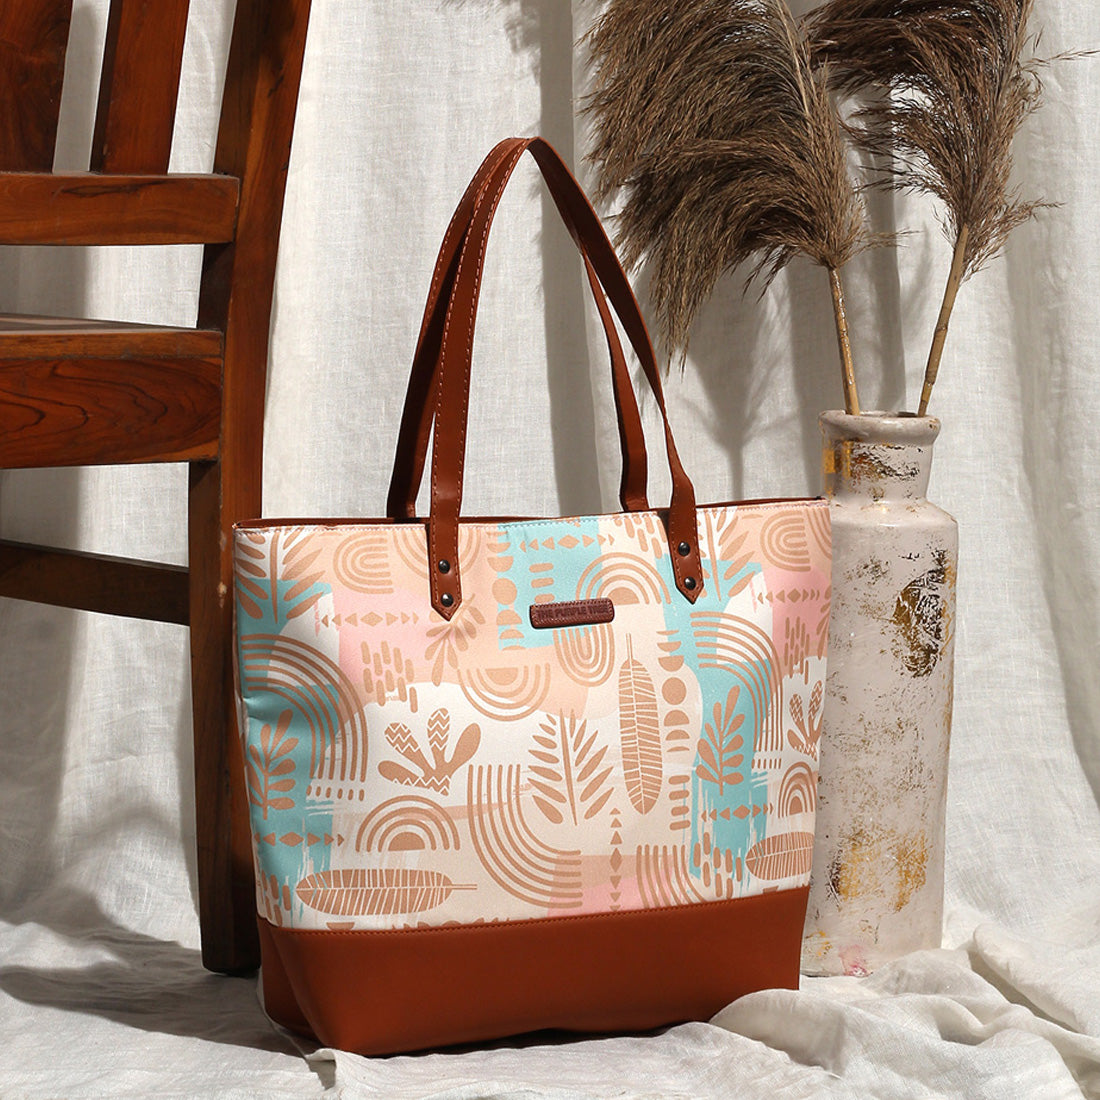 Light blue and pink patterned tote bag